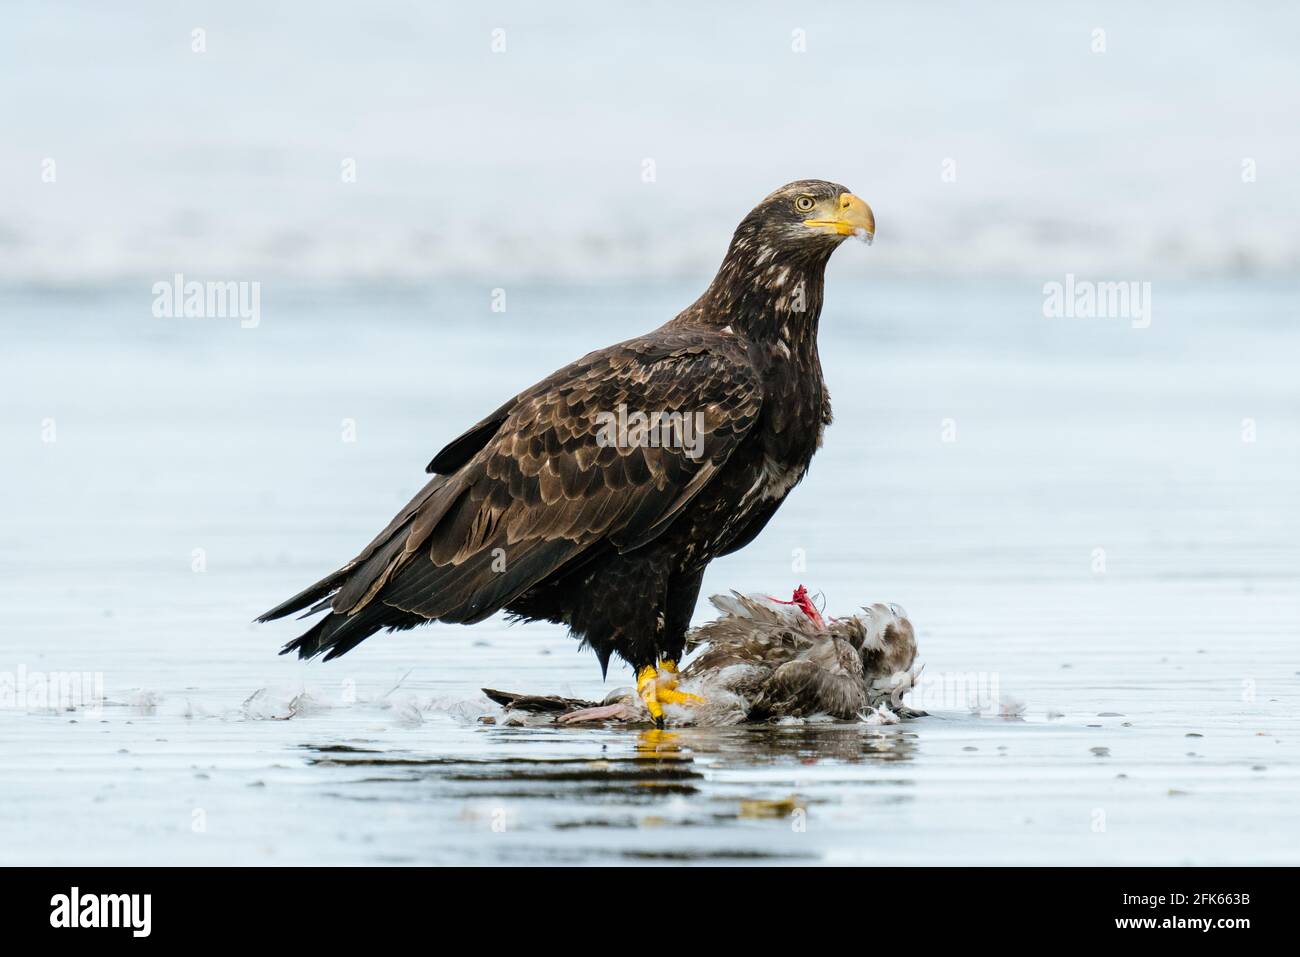 Closeup view of a bald eagle standing on an ocean beach with a gull Stock Photo